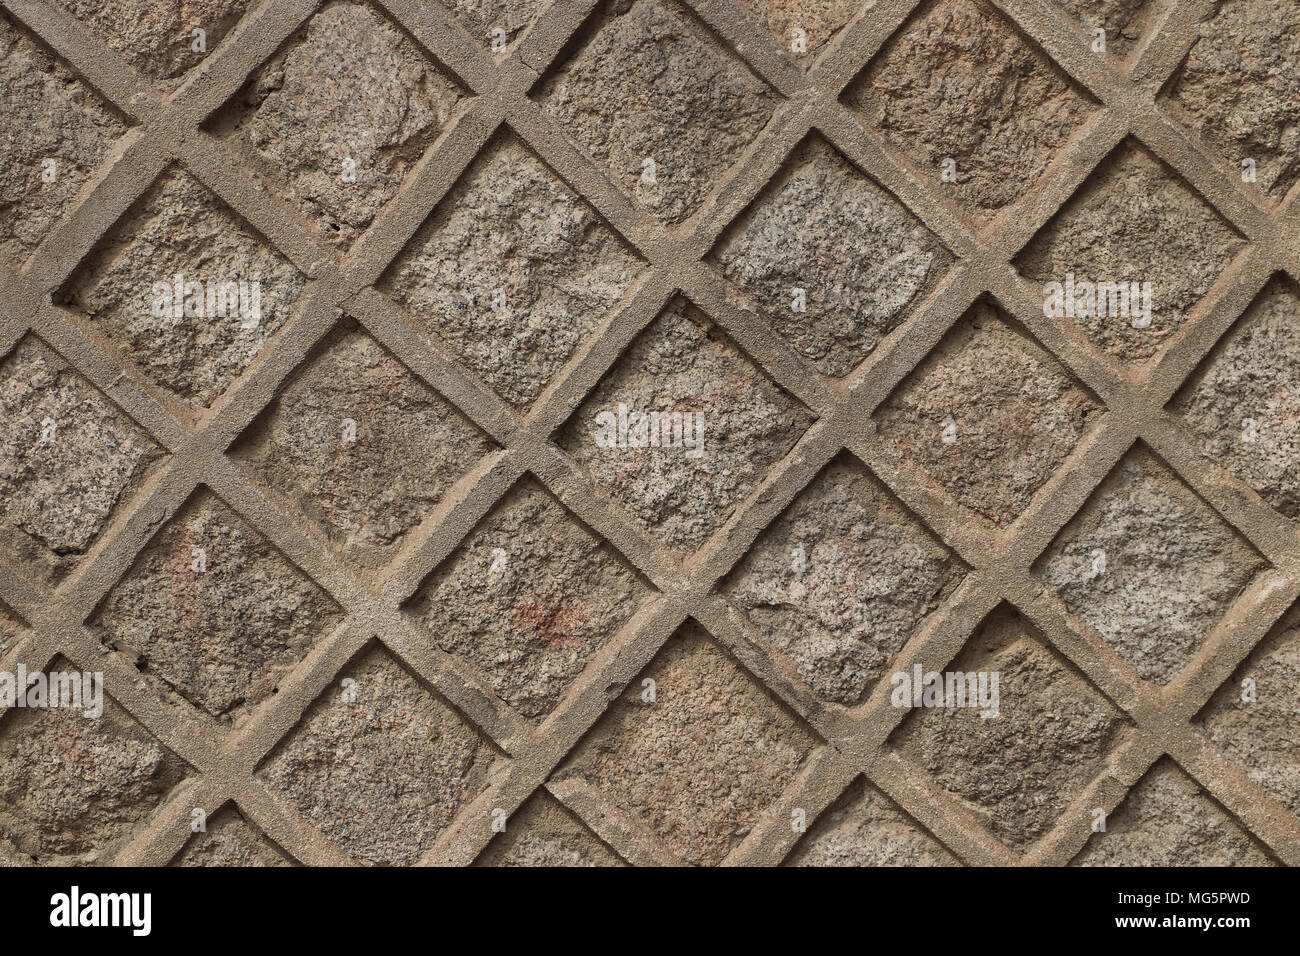 Patterned stone wall with squares set diagonally like a lattice. This wall is sand colored, would make good background. Slight shadows, daylight. Stock Photo